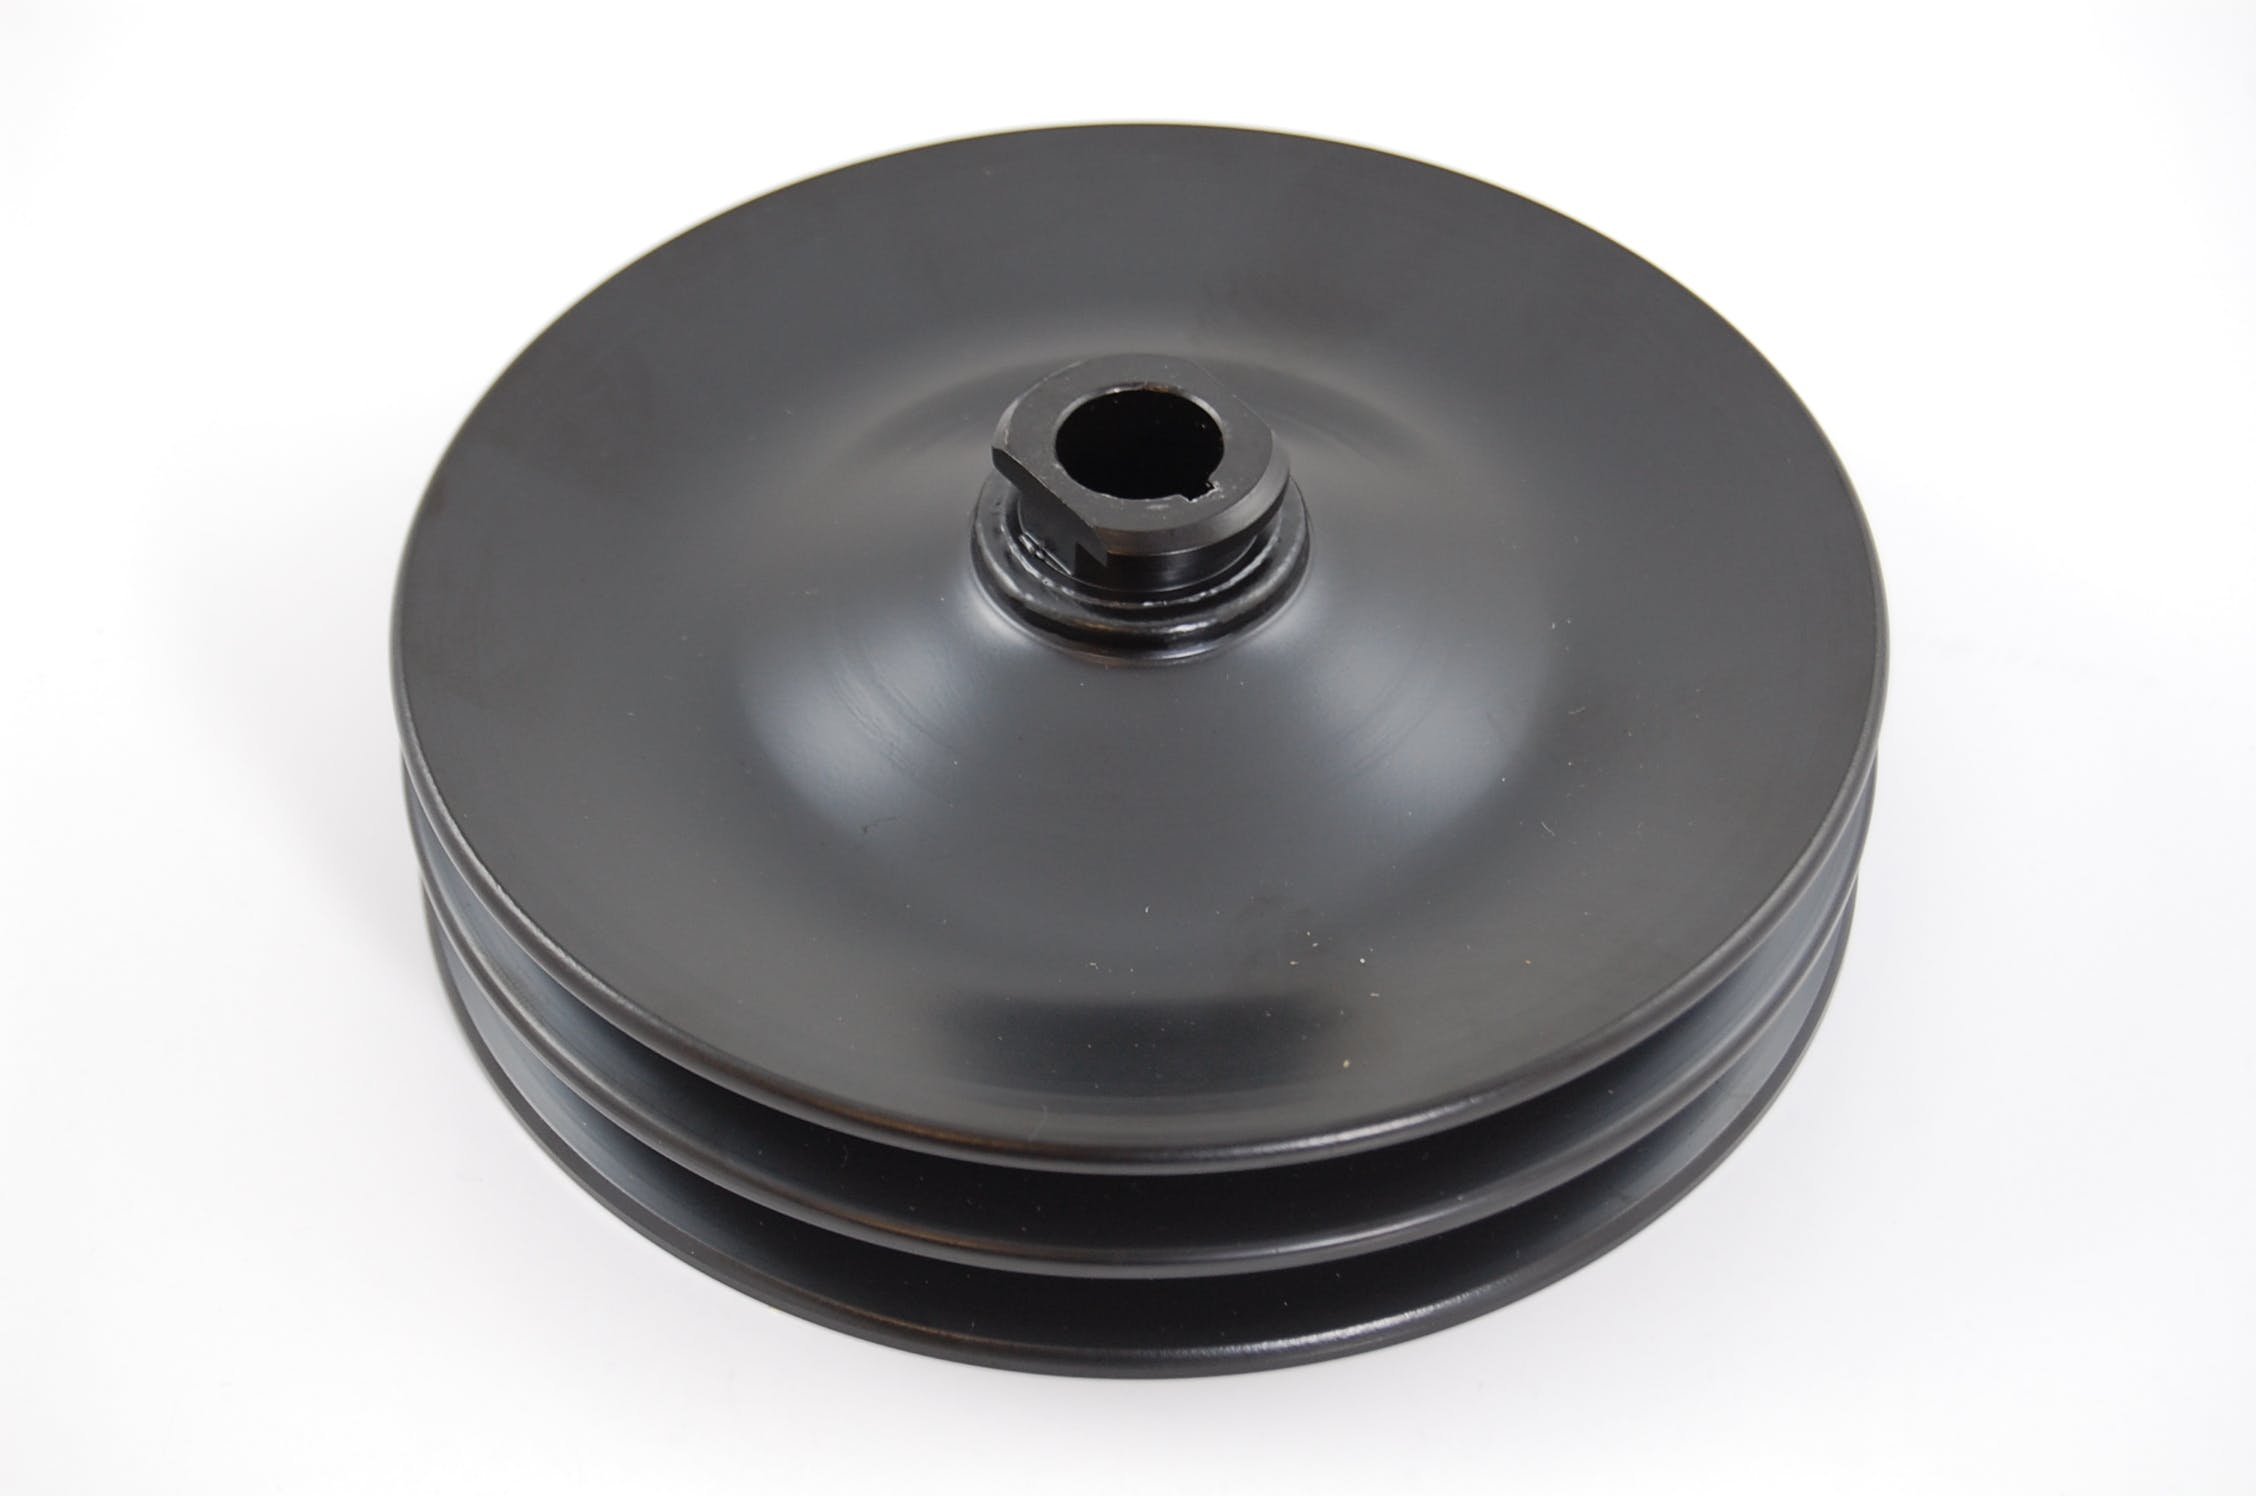 Racing Power Company R8947B Gm power steering pulley black double groove